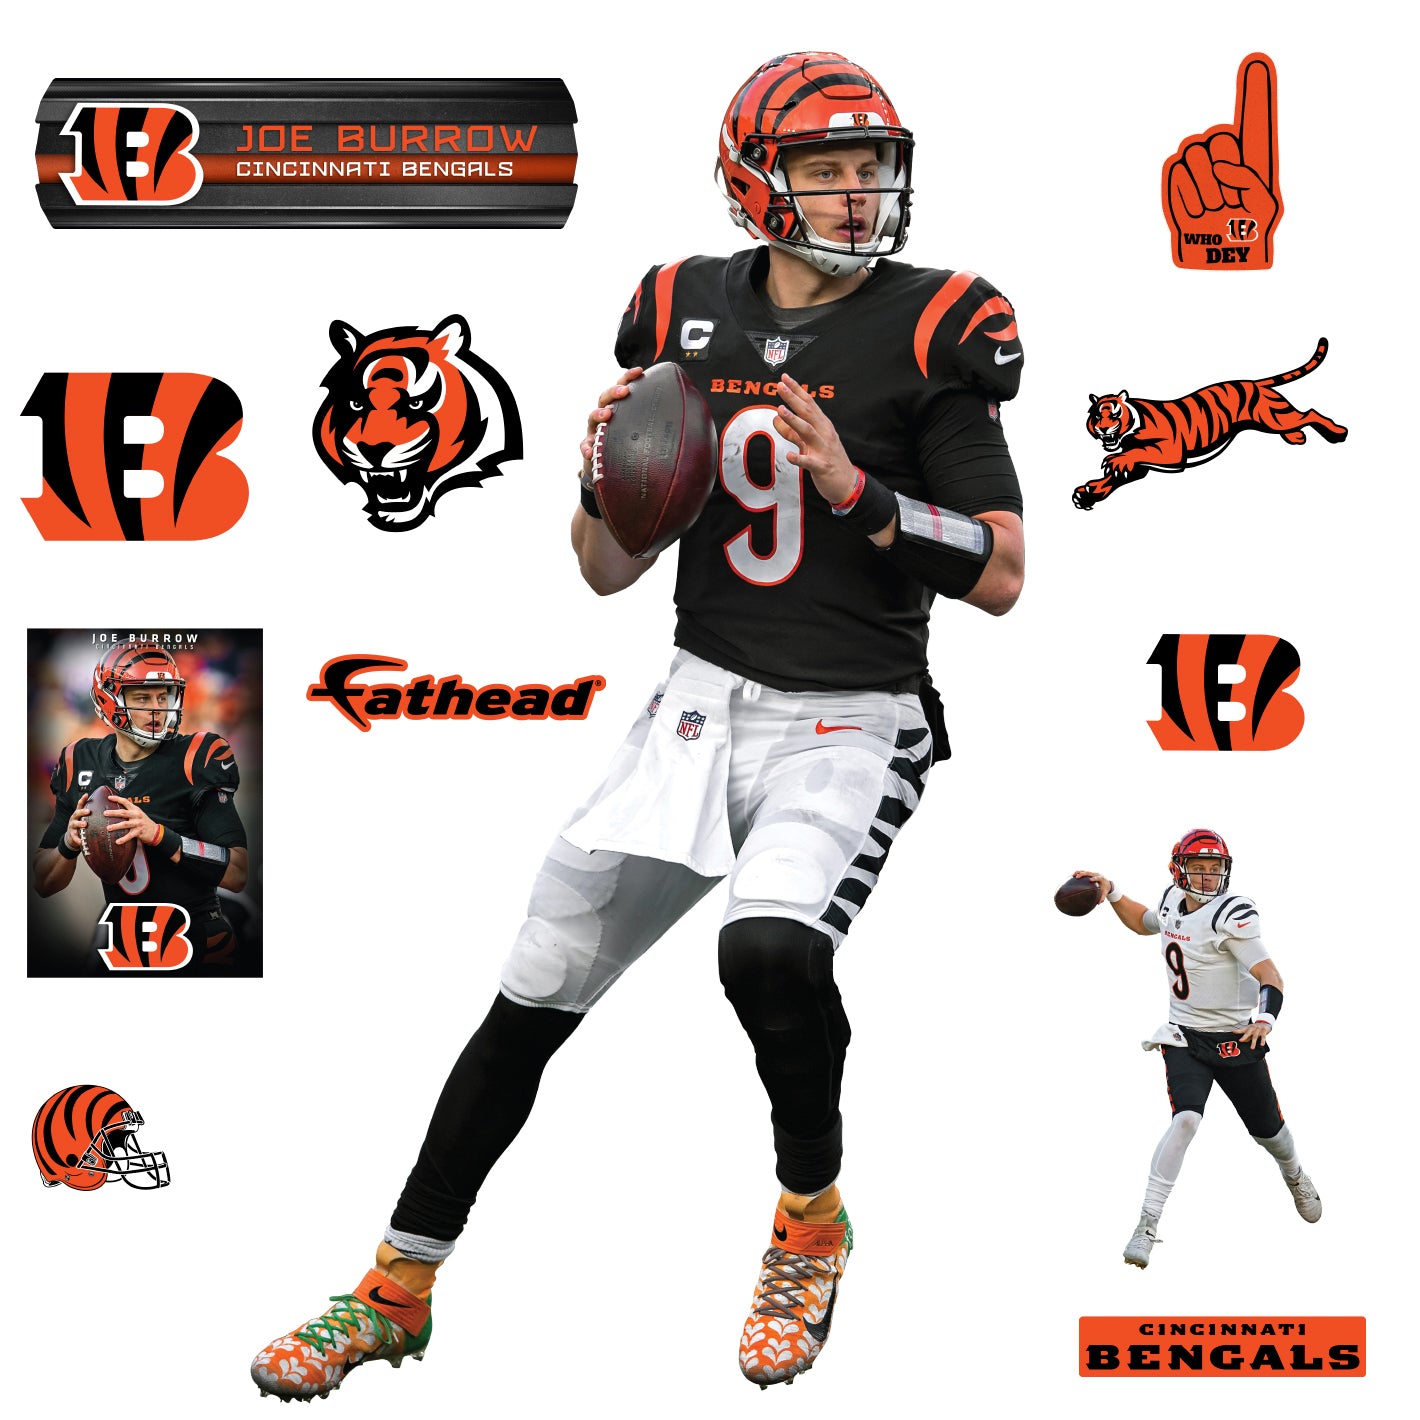 Cincinnati Bengals: Joe Burrow 2022 - NFL Removable Adhesive Wall Decal Life-Size Athlete +11 Wall Decals 43'W x 76'H